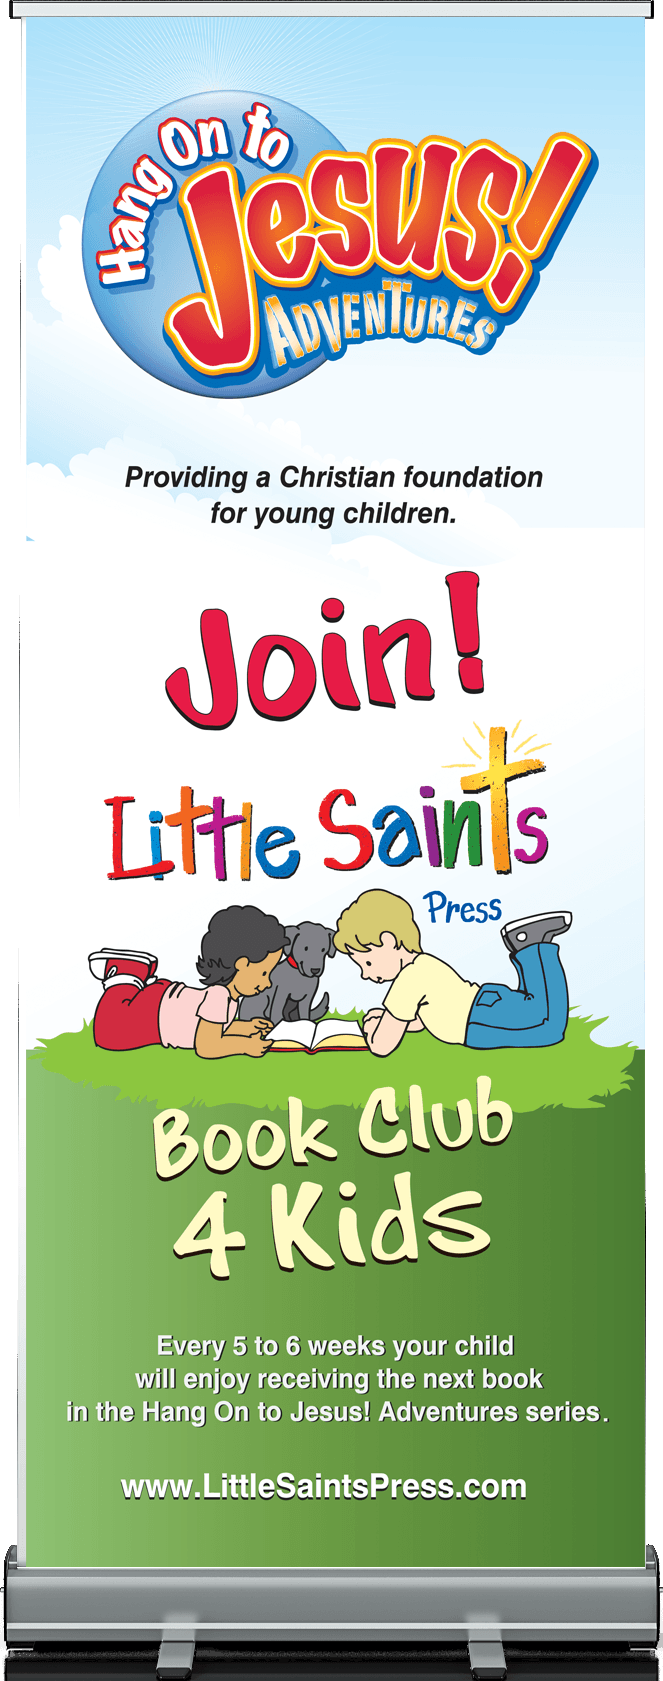 A sign that says `` join little saints book club 4 kids ''.